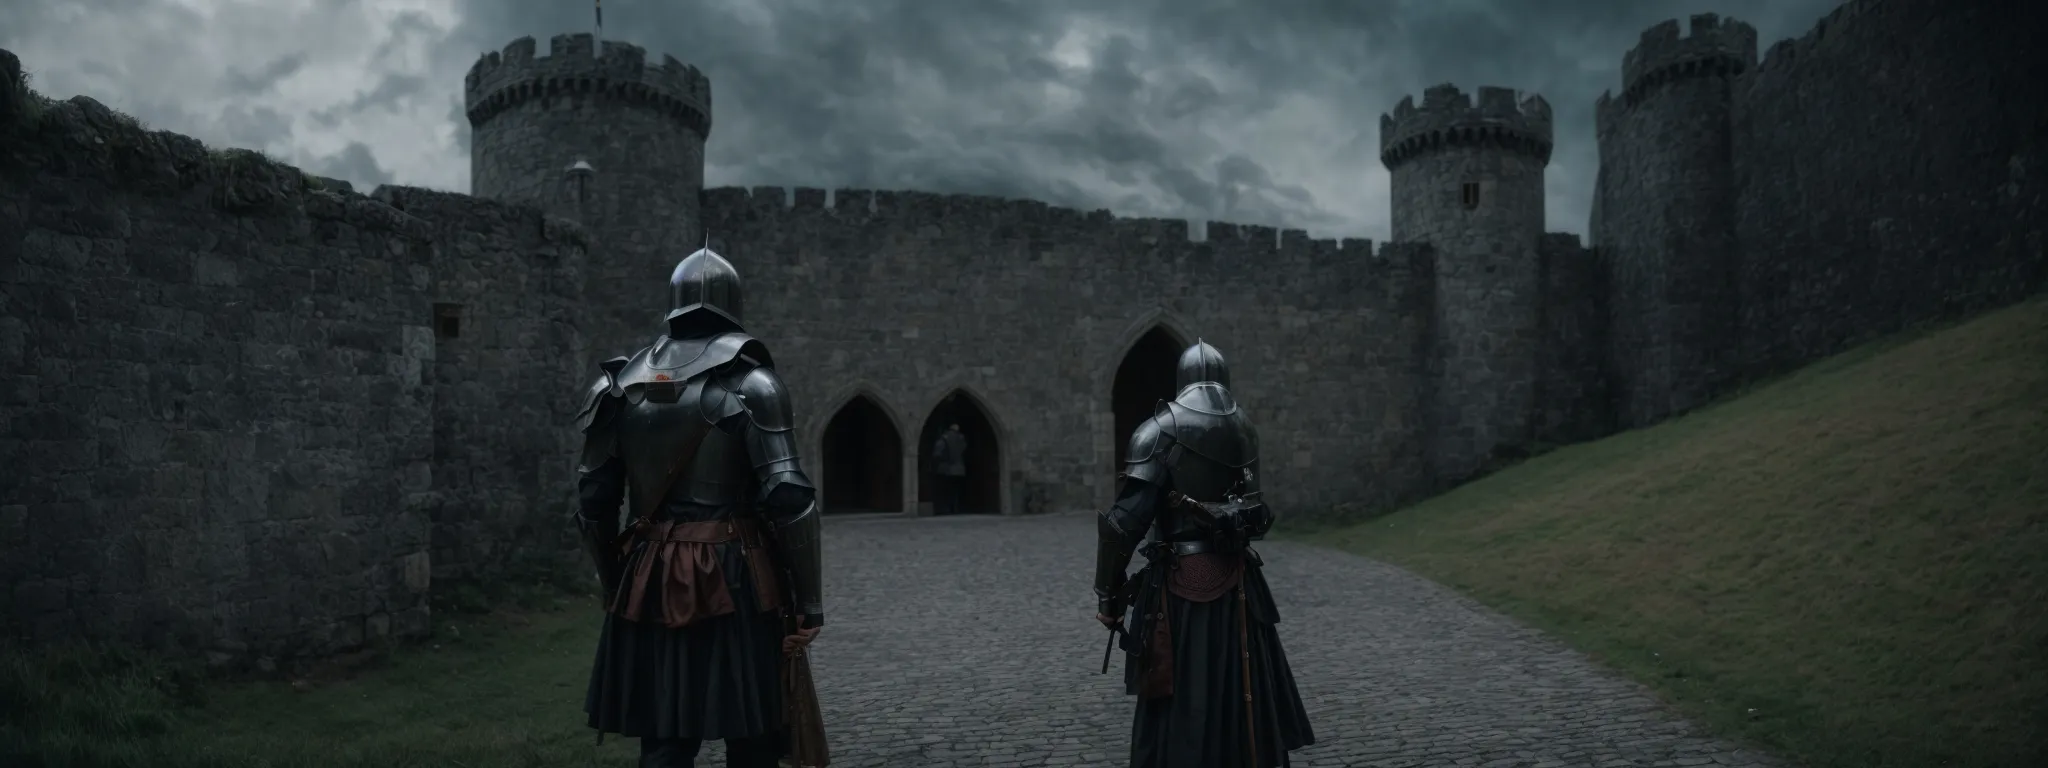 a knight in armor steadfastly guards a castle gate amidst a digital storm.